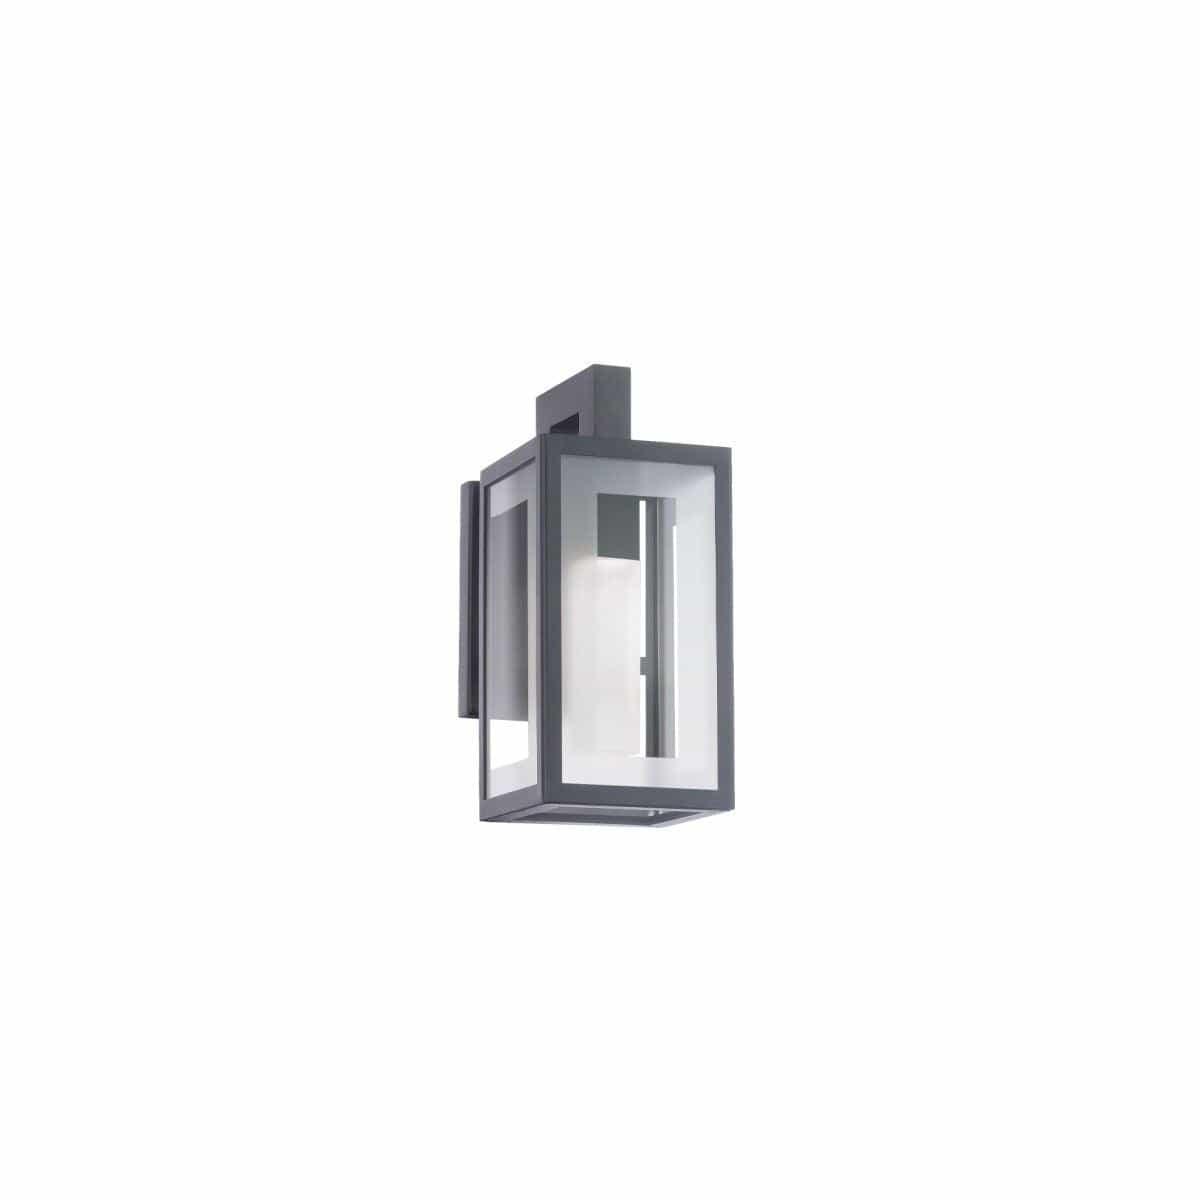 Modern Forms - Cambridge LED Outdoor Wall Sconce - WS-W24211-BK | Montreal Lighting & Hardware